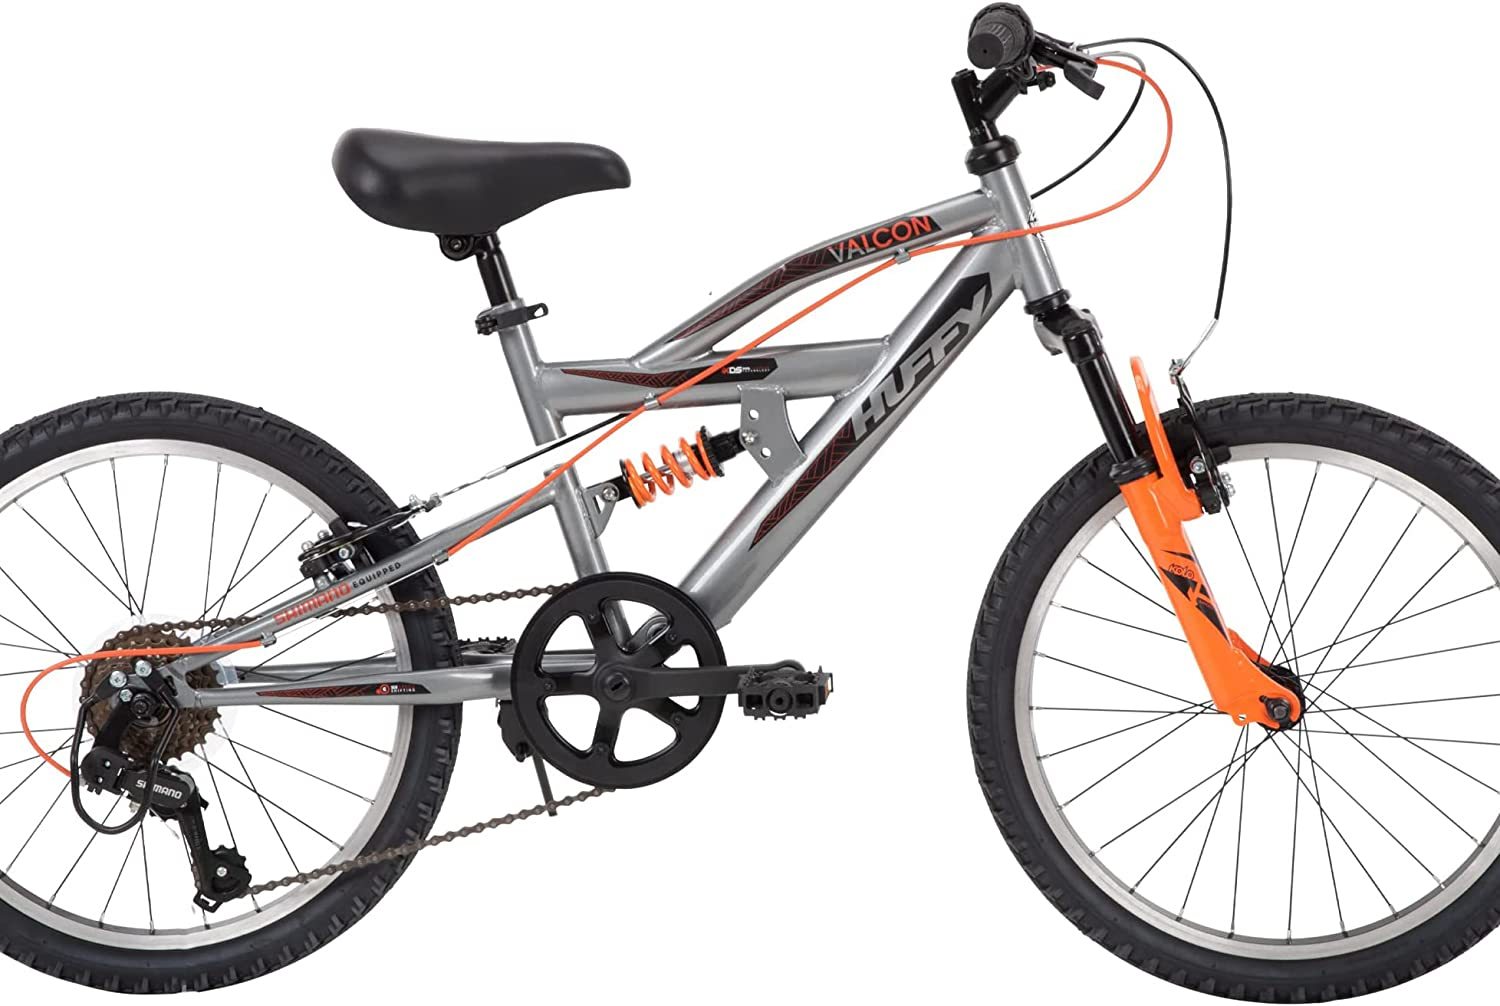 Boys' Huffy Valcon 20" Mountain Bike With Dual Suspension, Silver And Orange. - $298.98